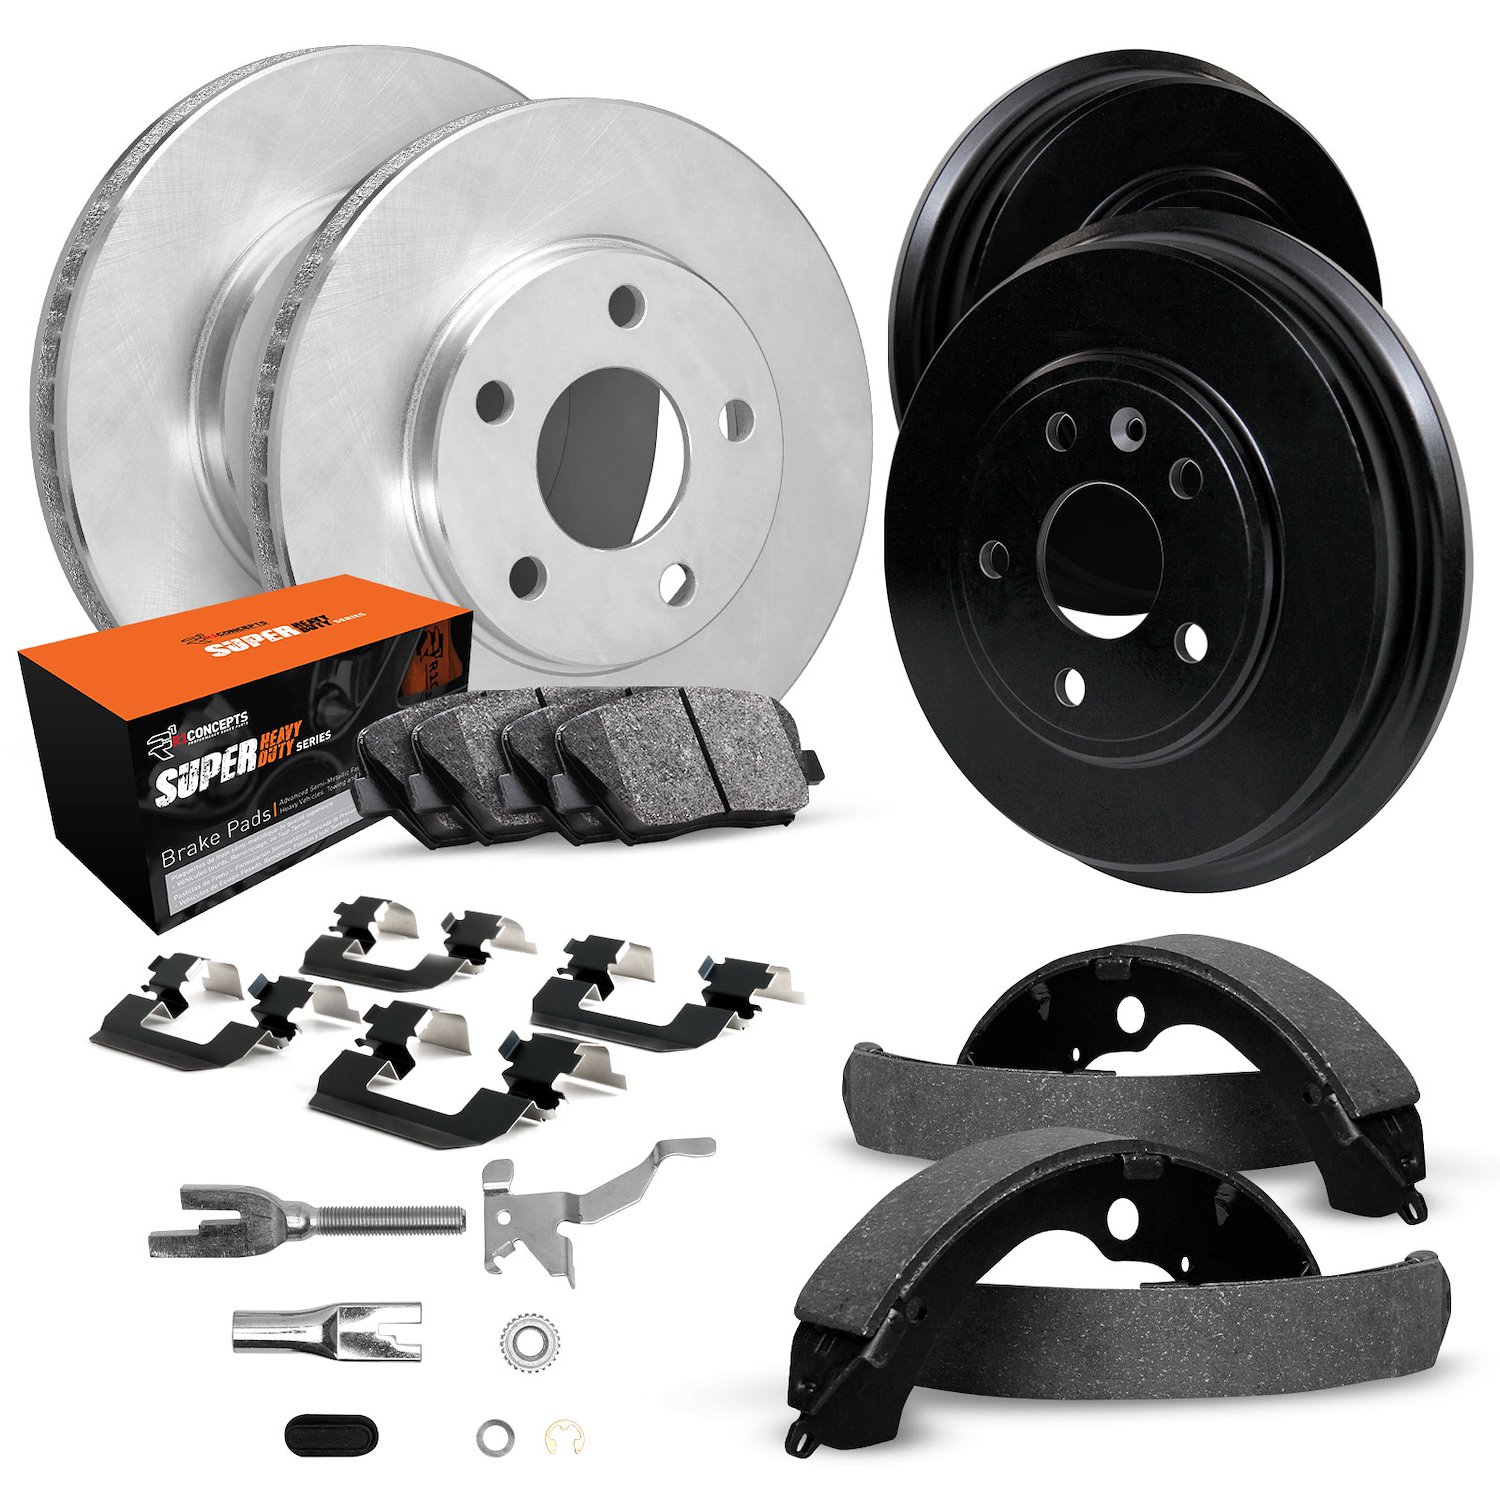 E-Line Blank Brake Rotor & Drum Set w/Super-Duty Pads, Shoes, Hardware, & Adjusters, 1969-1970 GM, Position: Front & Rear